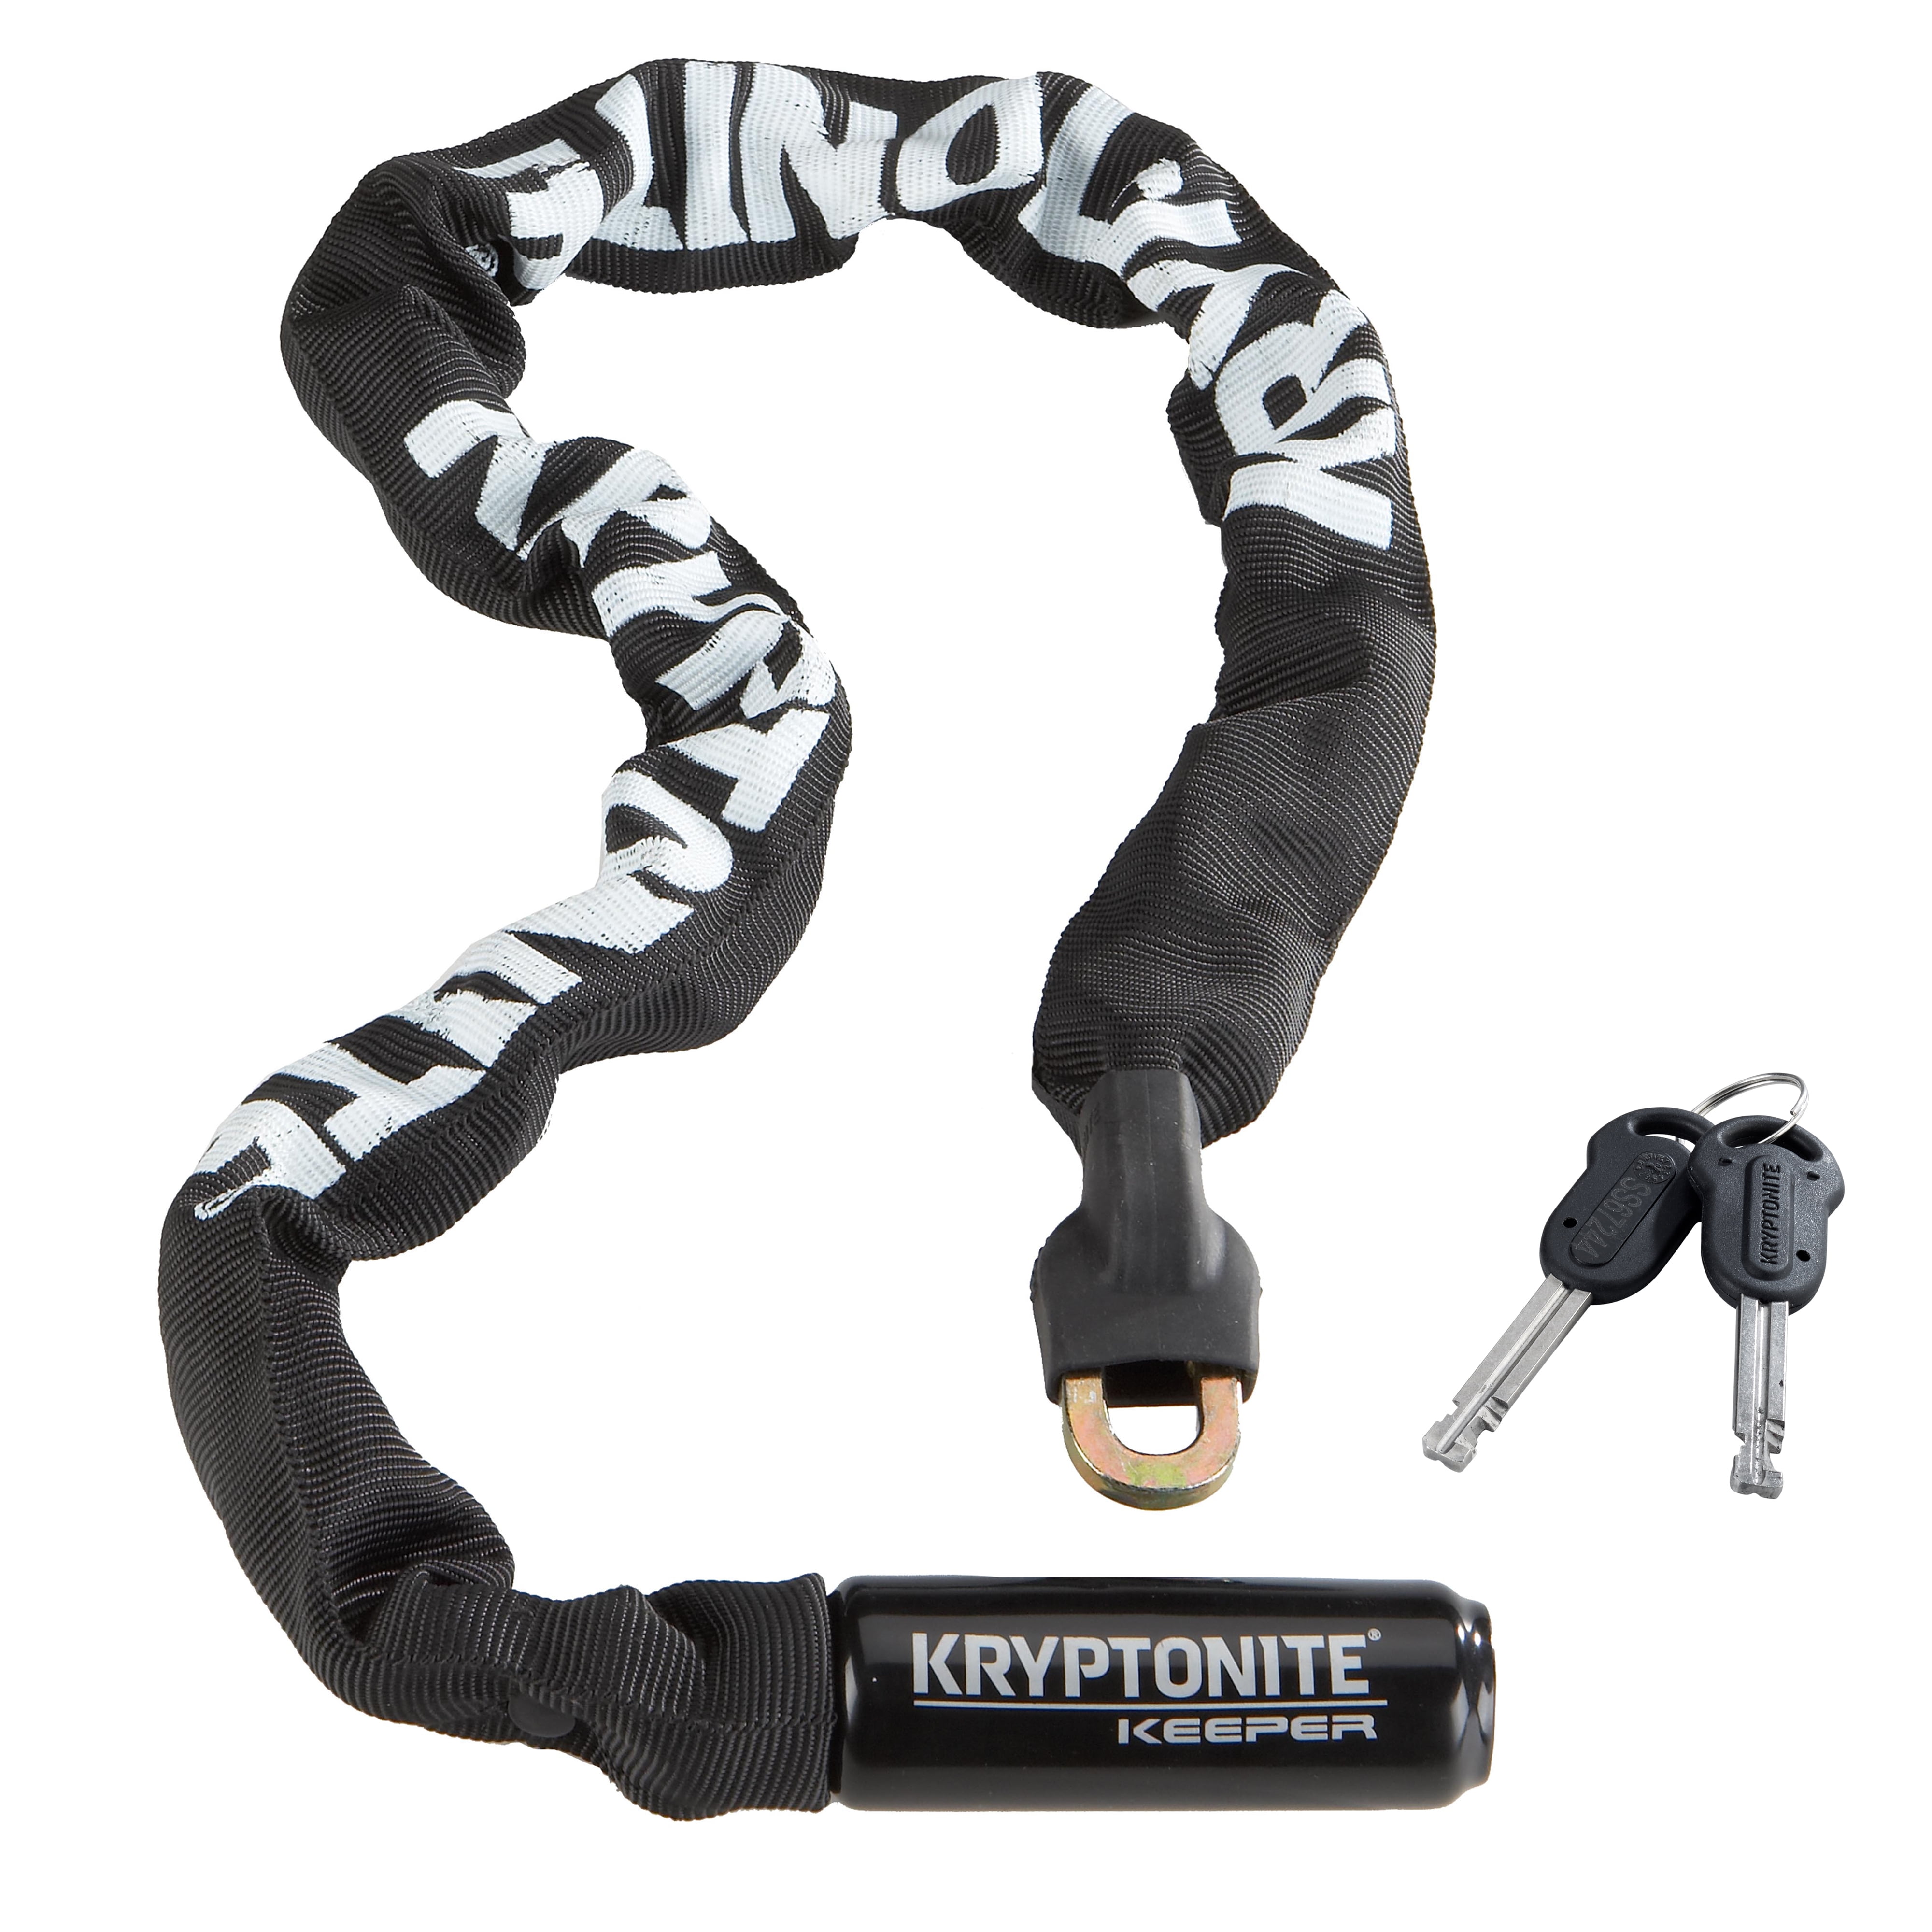 Kryptonite Keeper Integrated Chain Lock 47"'120cm x7mm flexible Compact Security 